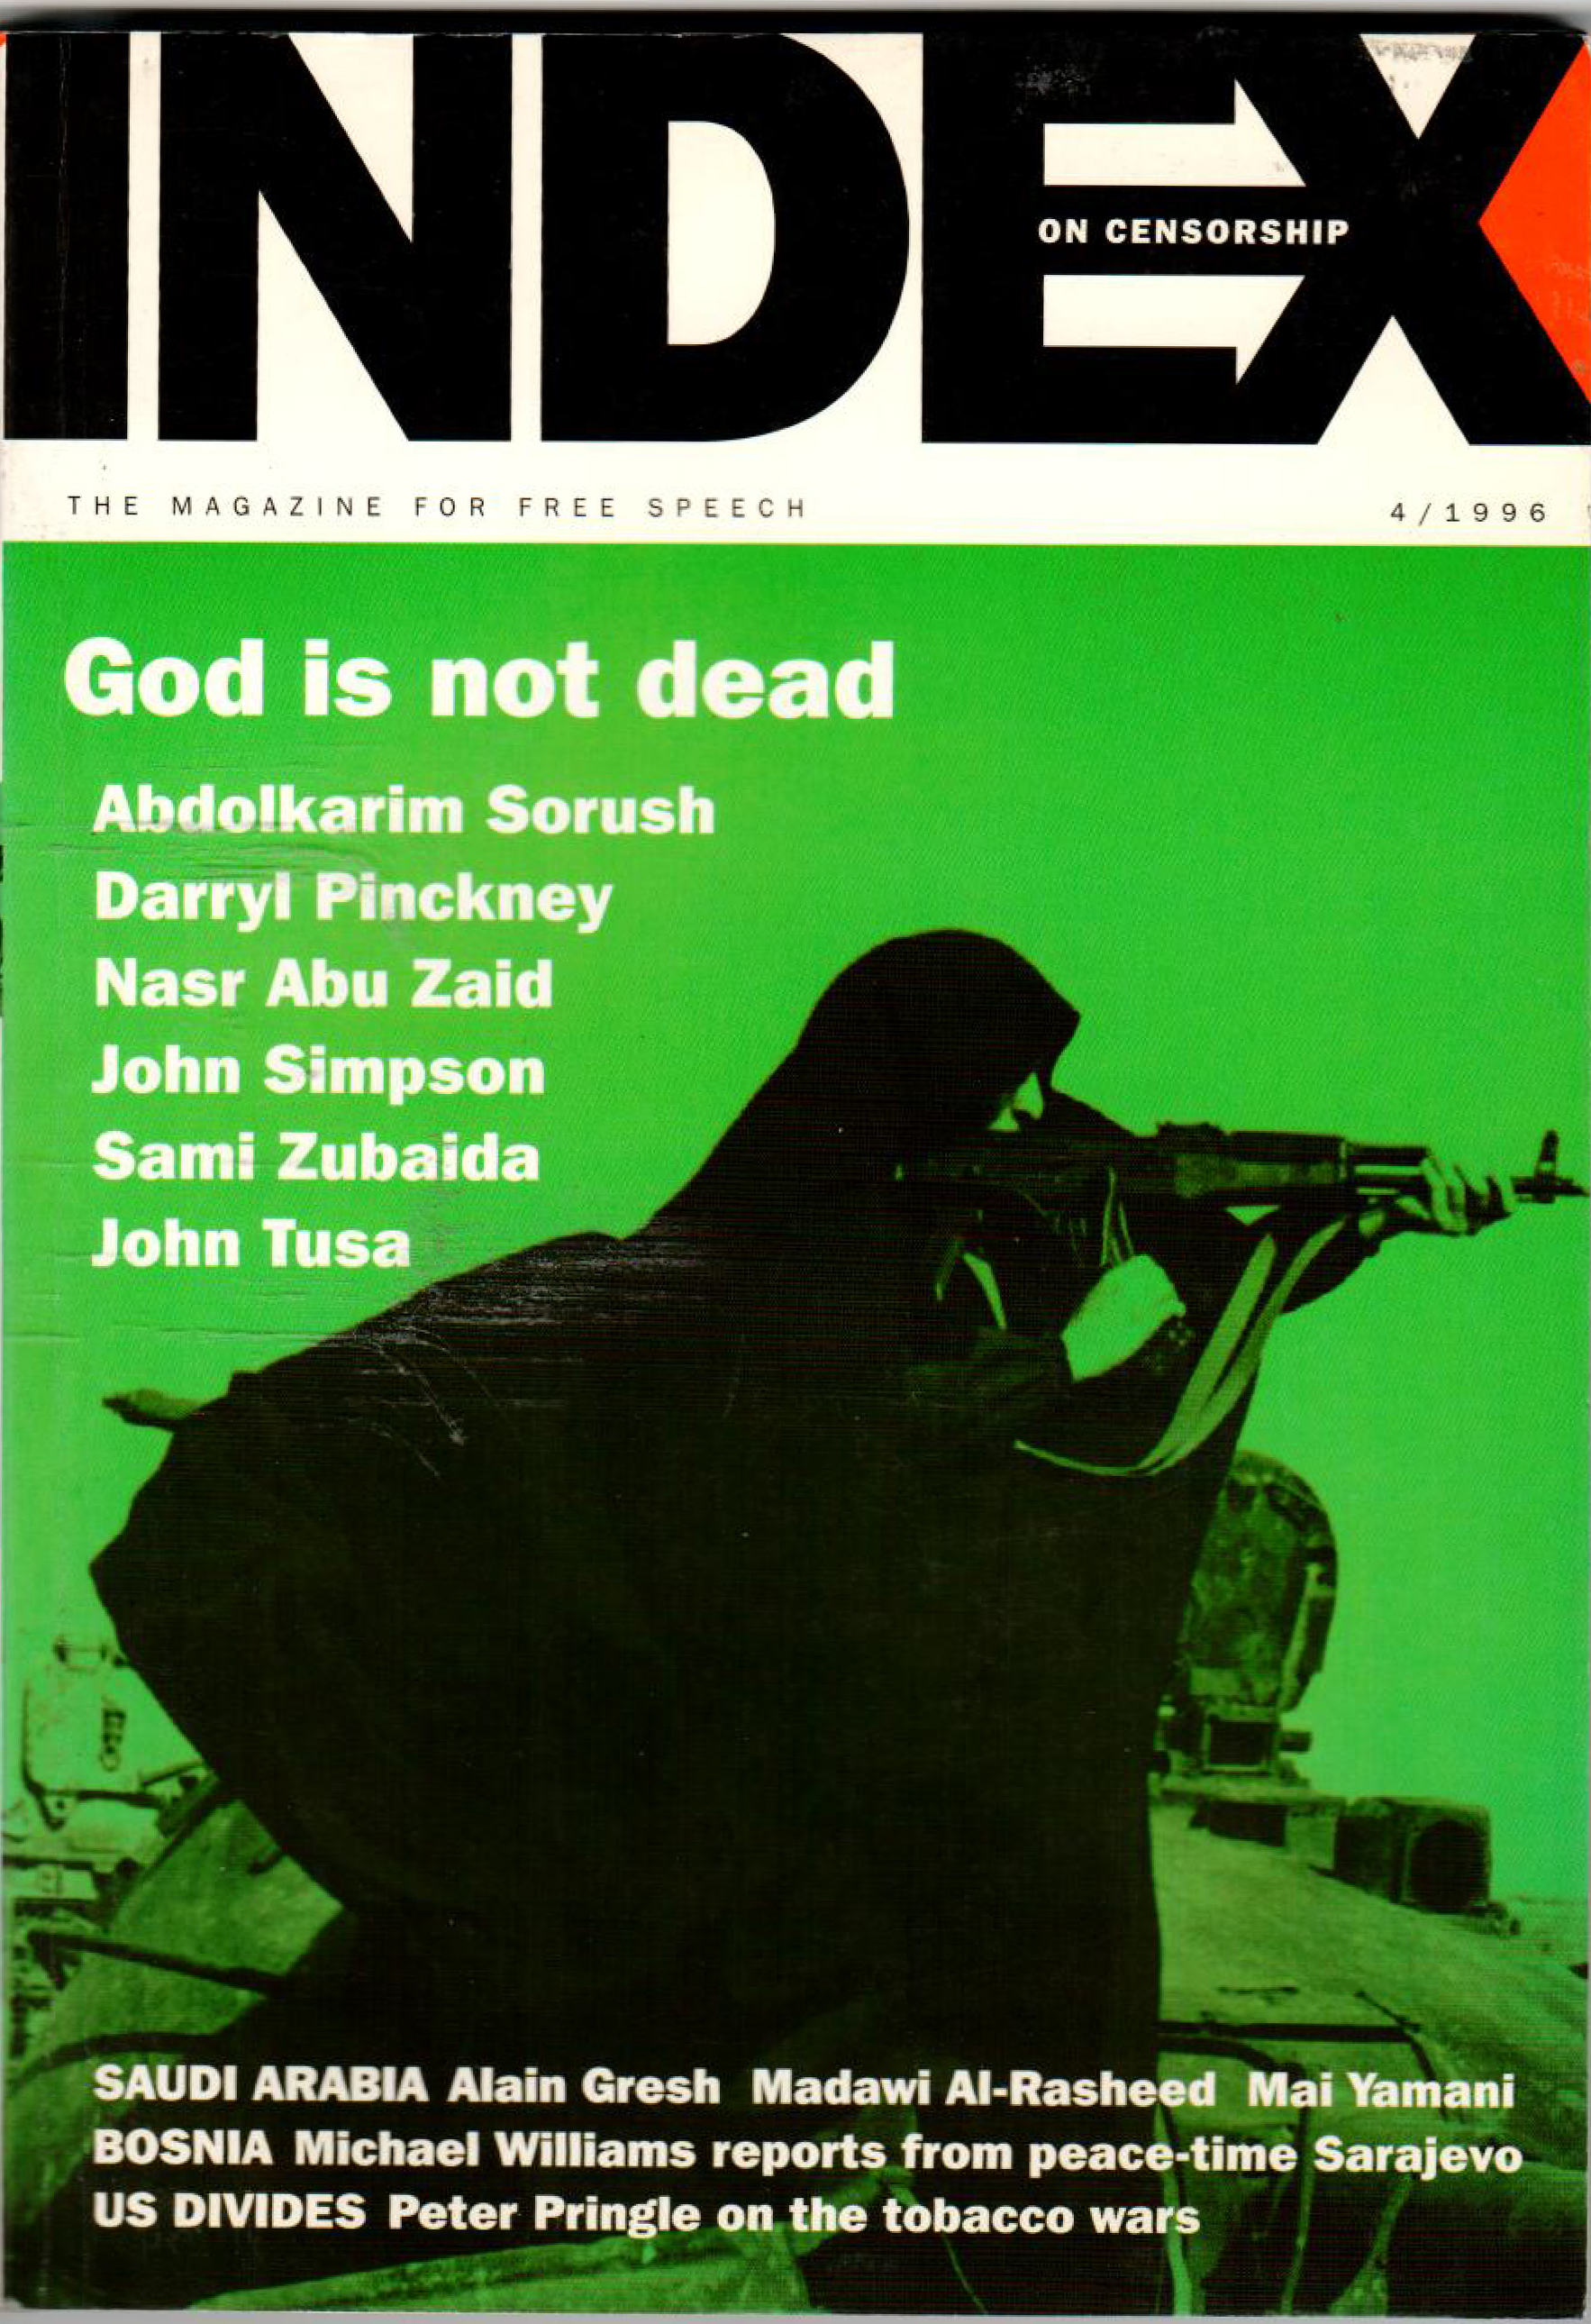 God is not dead, the July 1996 issue of Index on Censorship magazine.